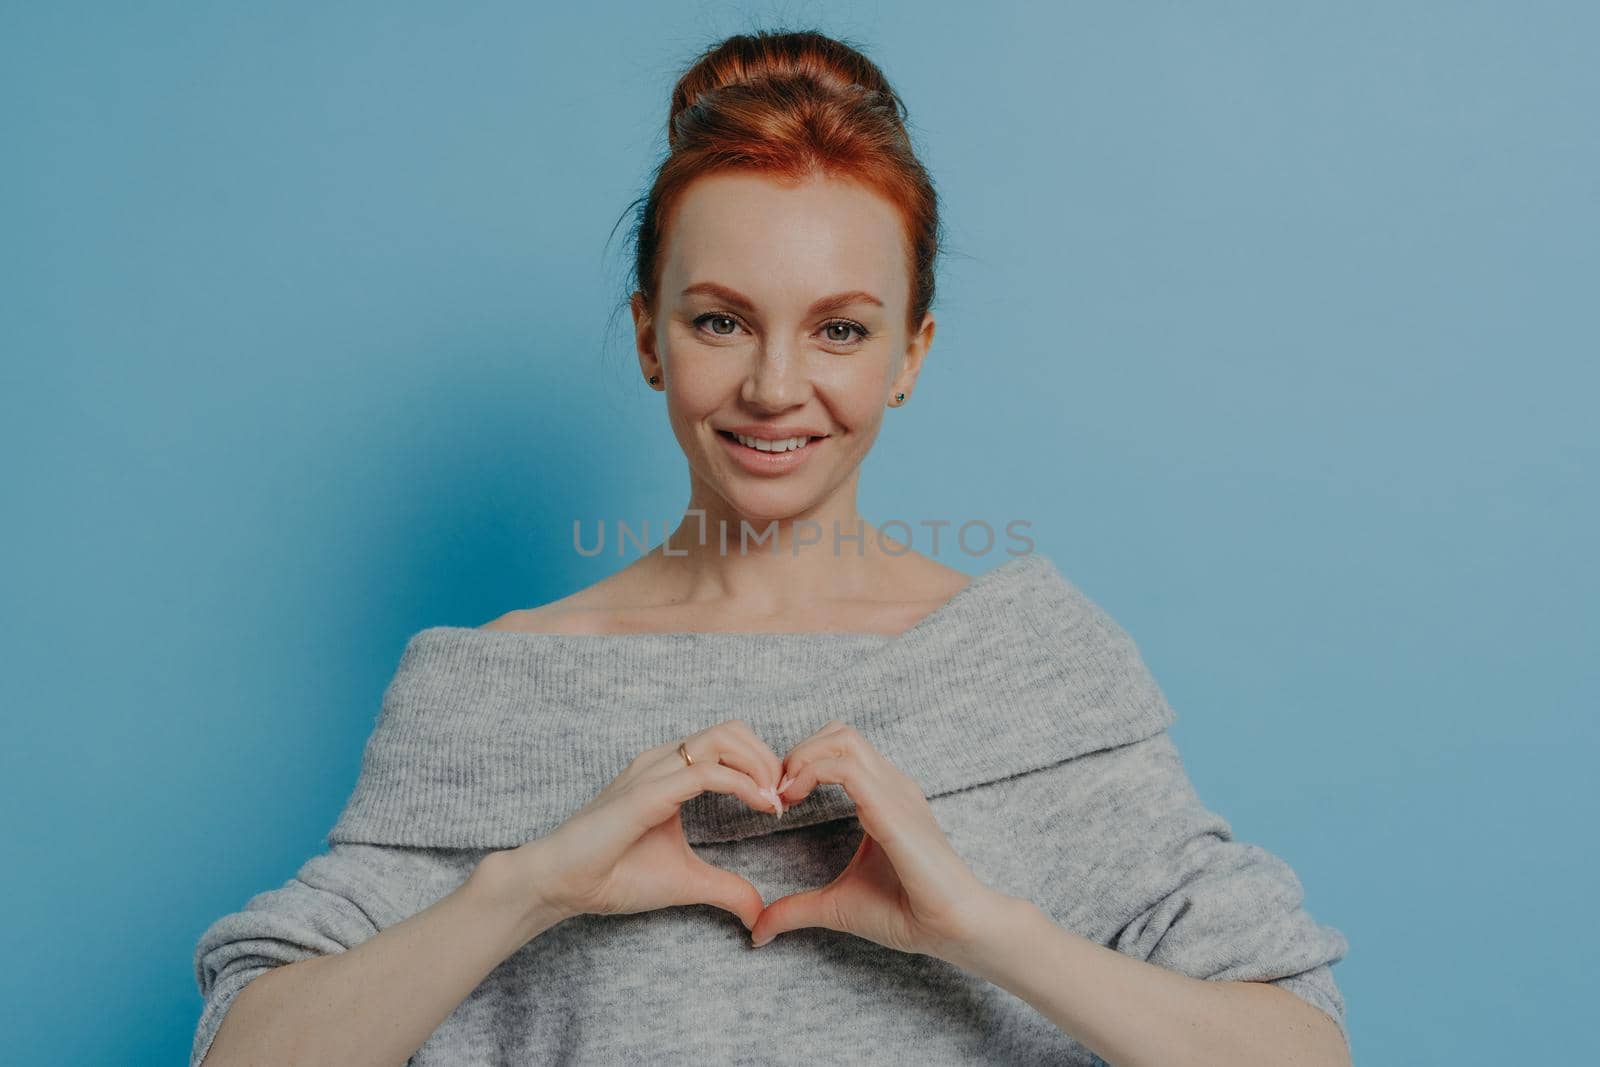 Kind smiling red haired woman showing heart gesture on chest isolated on blue wall background by vkstock